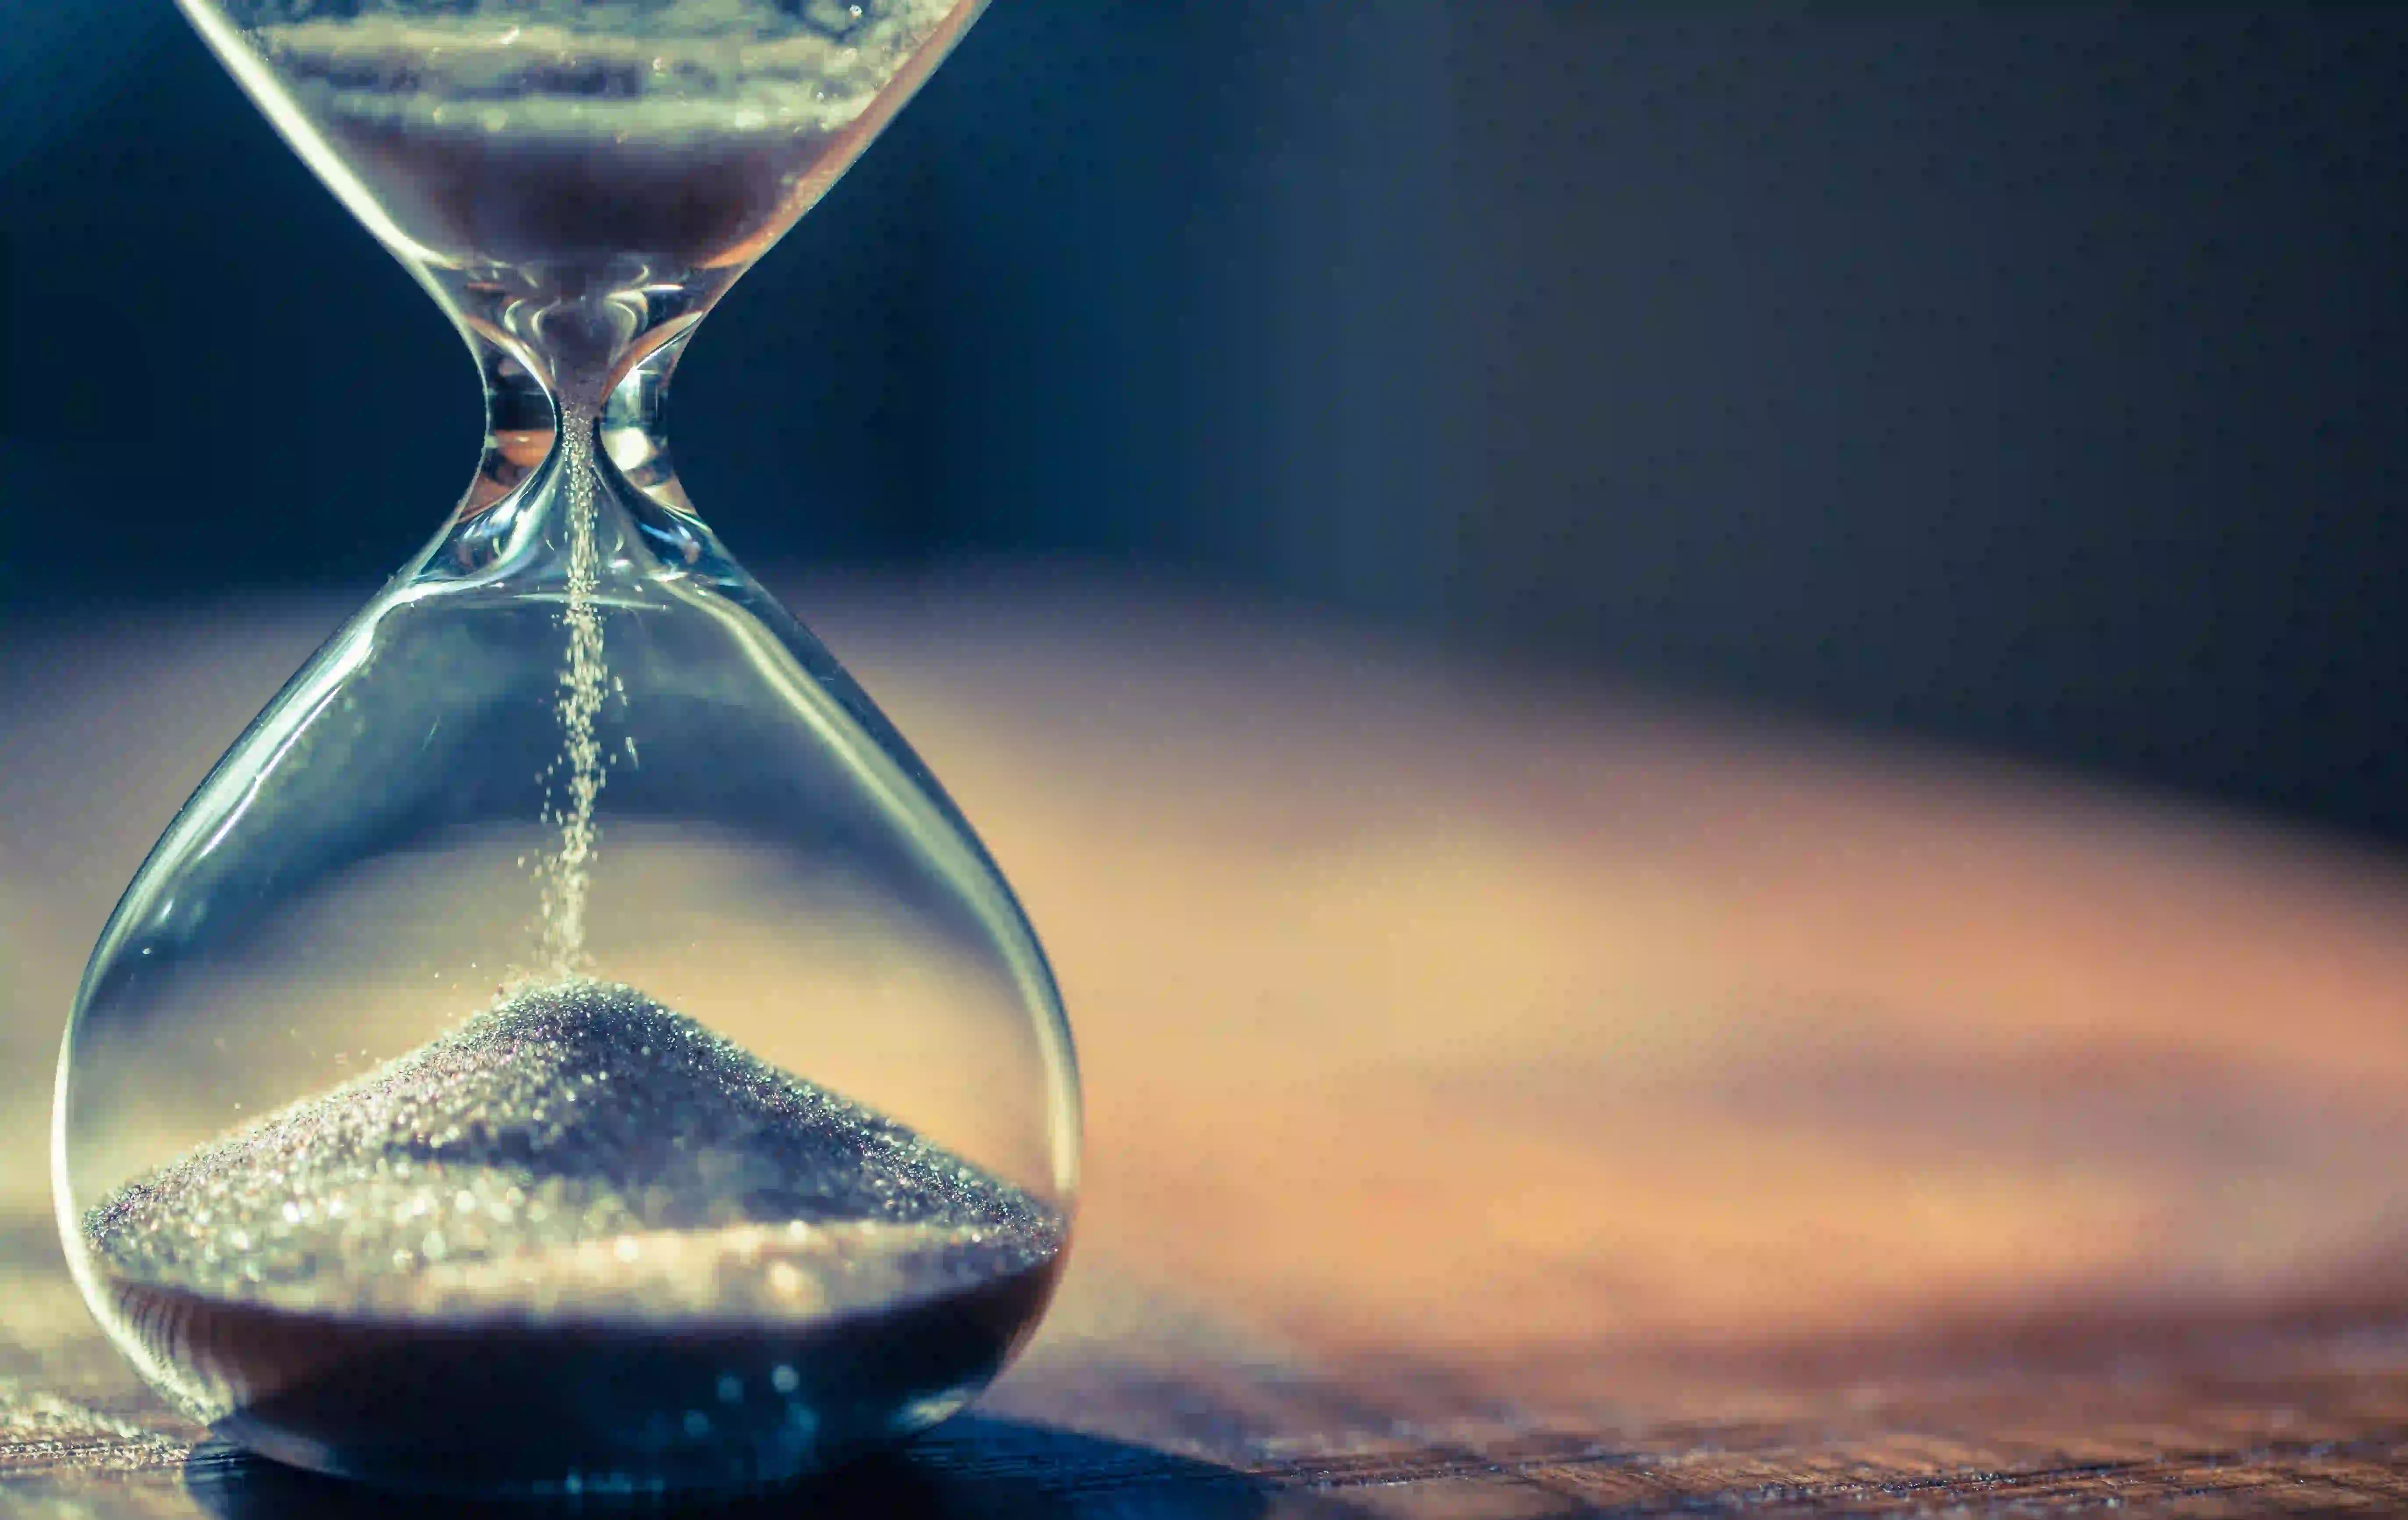 sand running in an hourglass that measures time passing